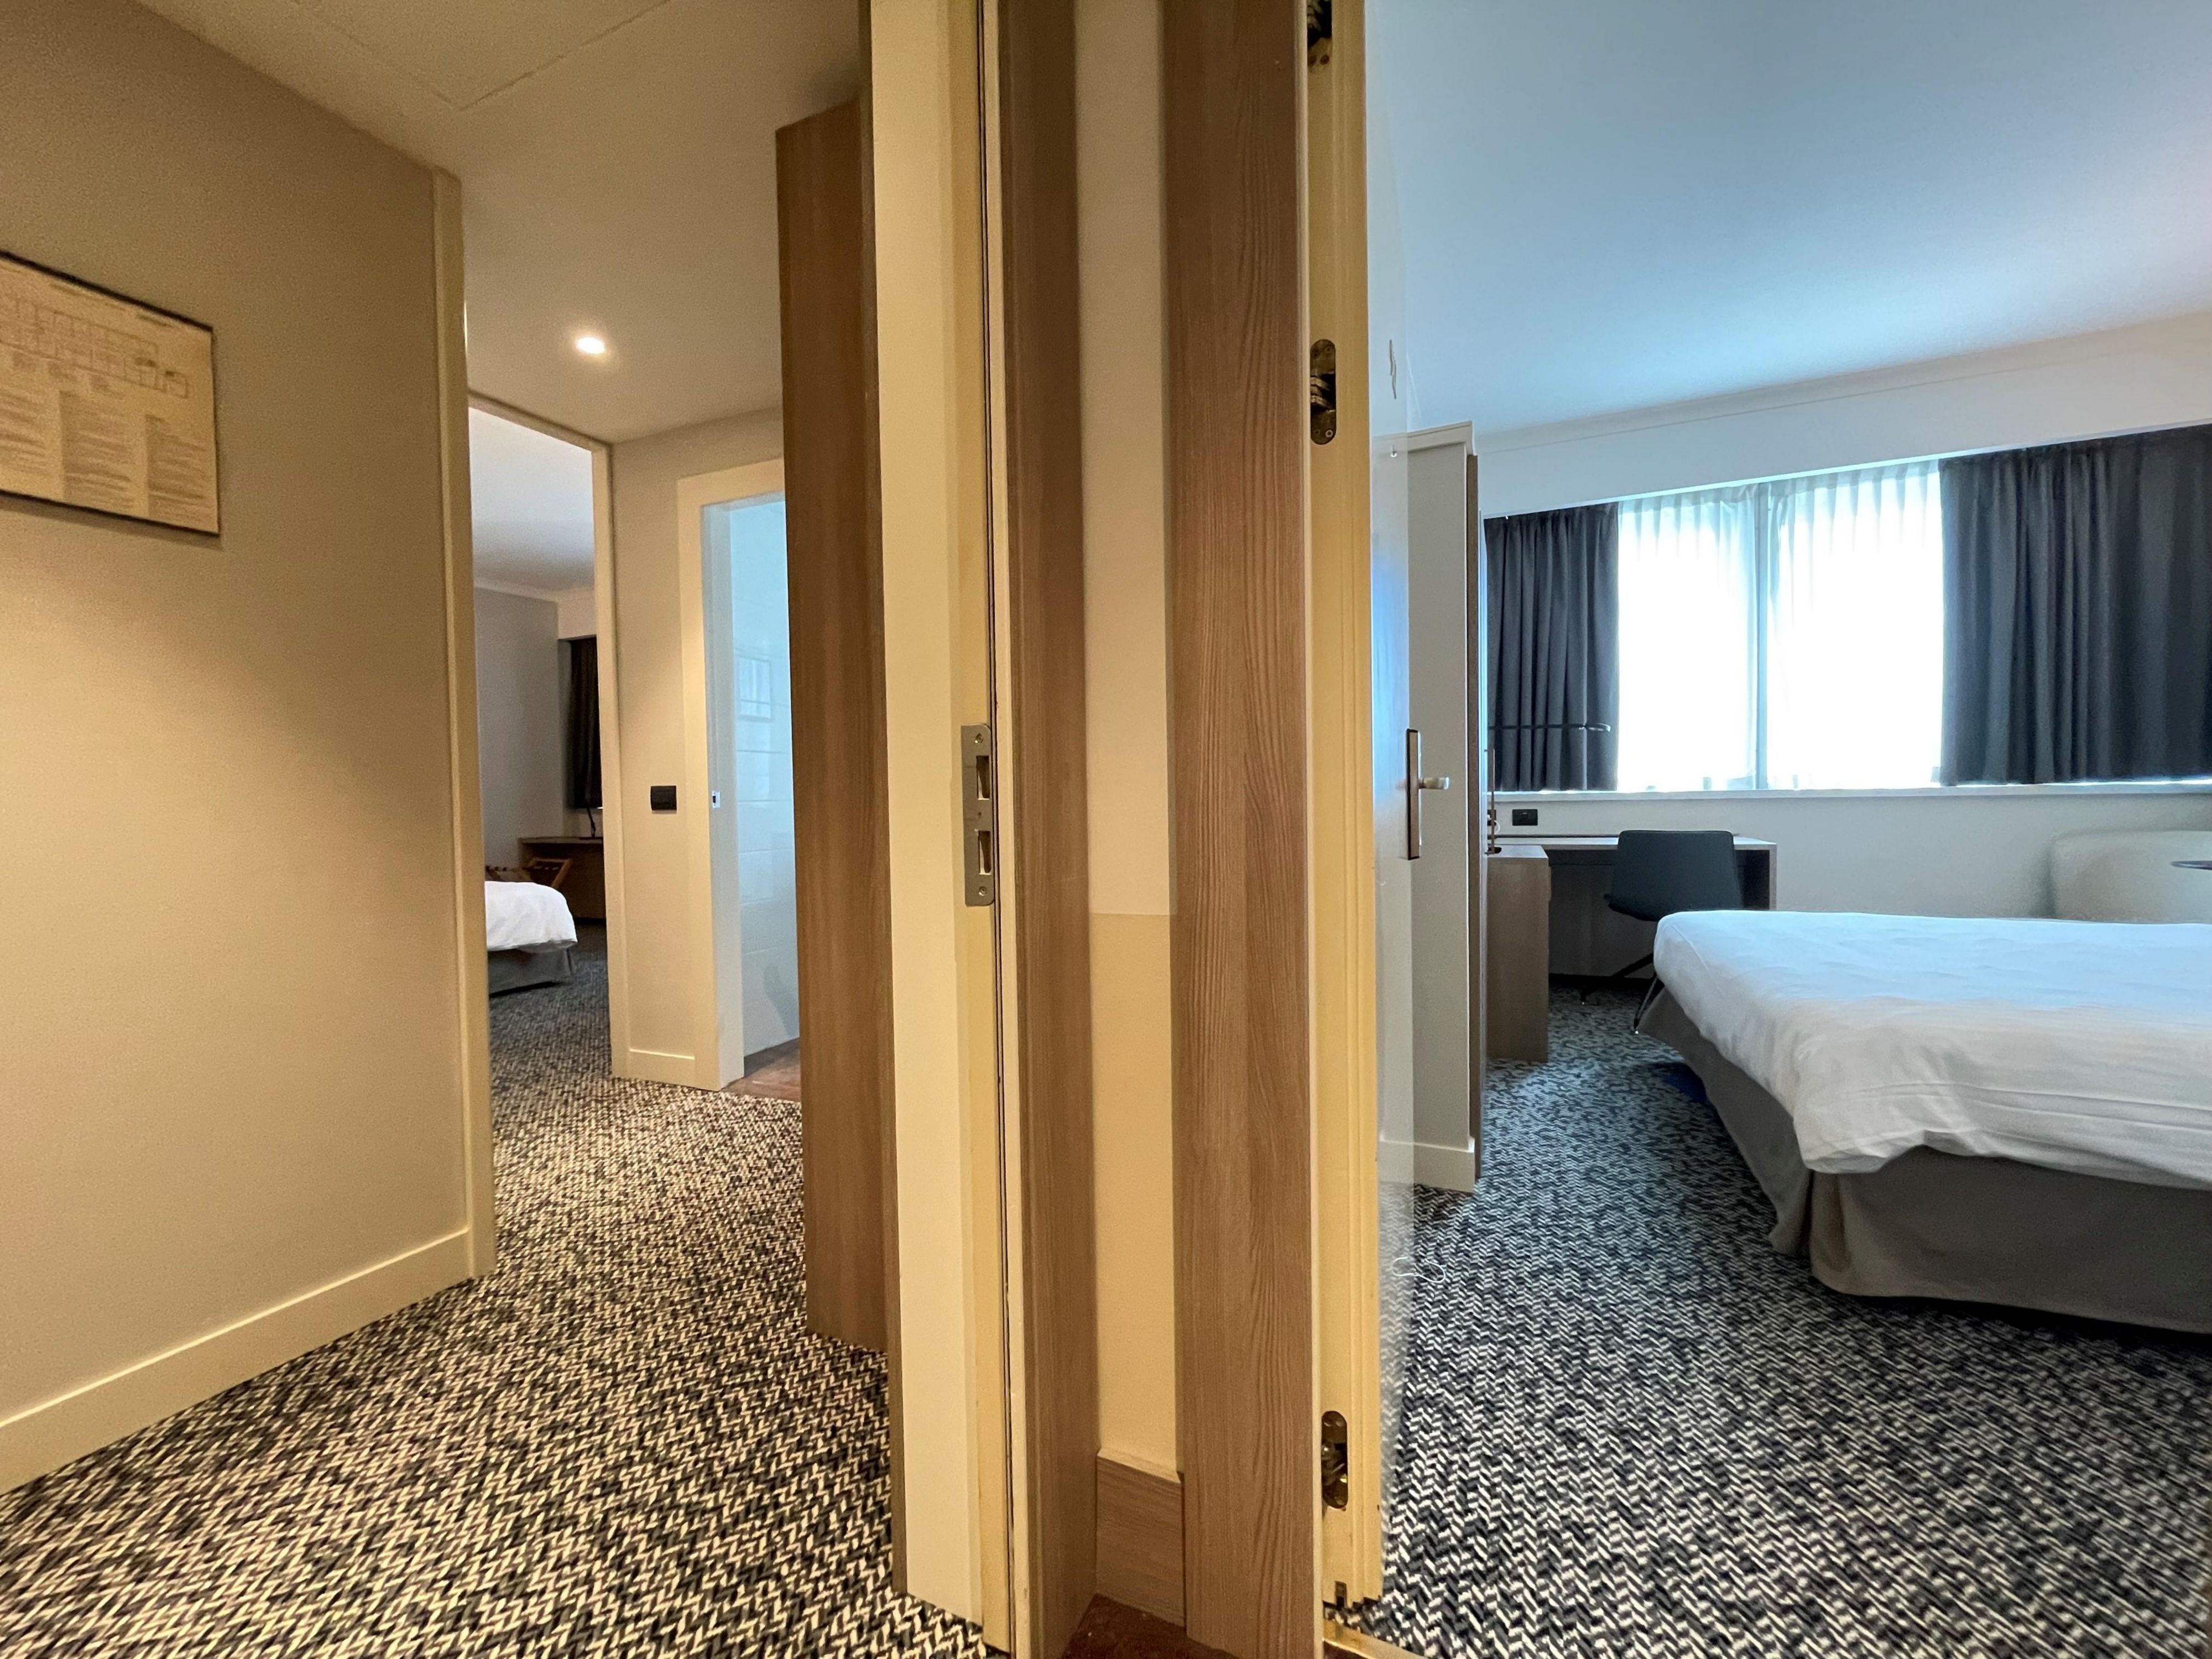 Bring your loved ones! We have different combinations of connecting rooms available that can accommodate up to five people. Contact us to book.